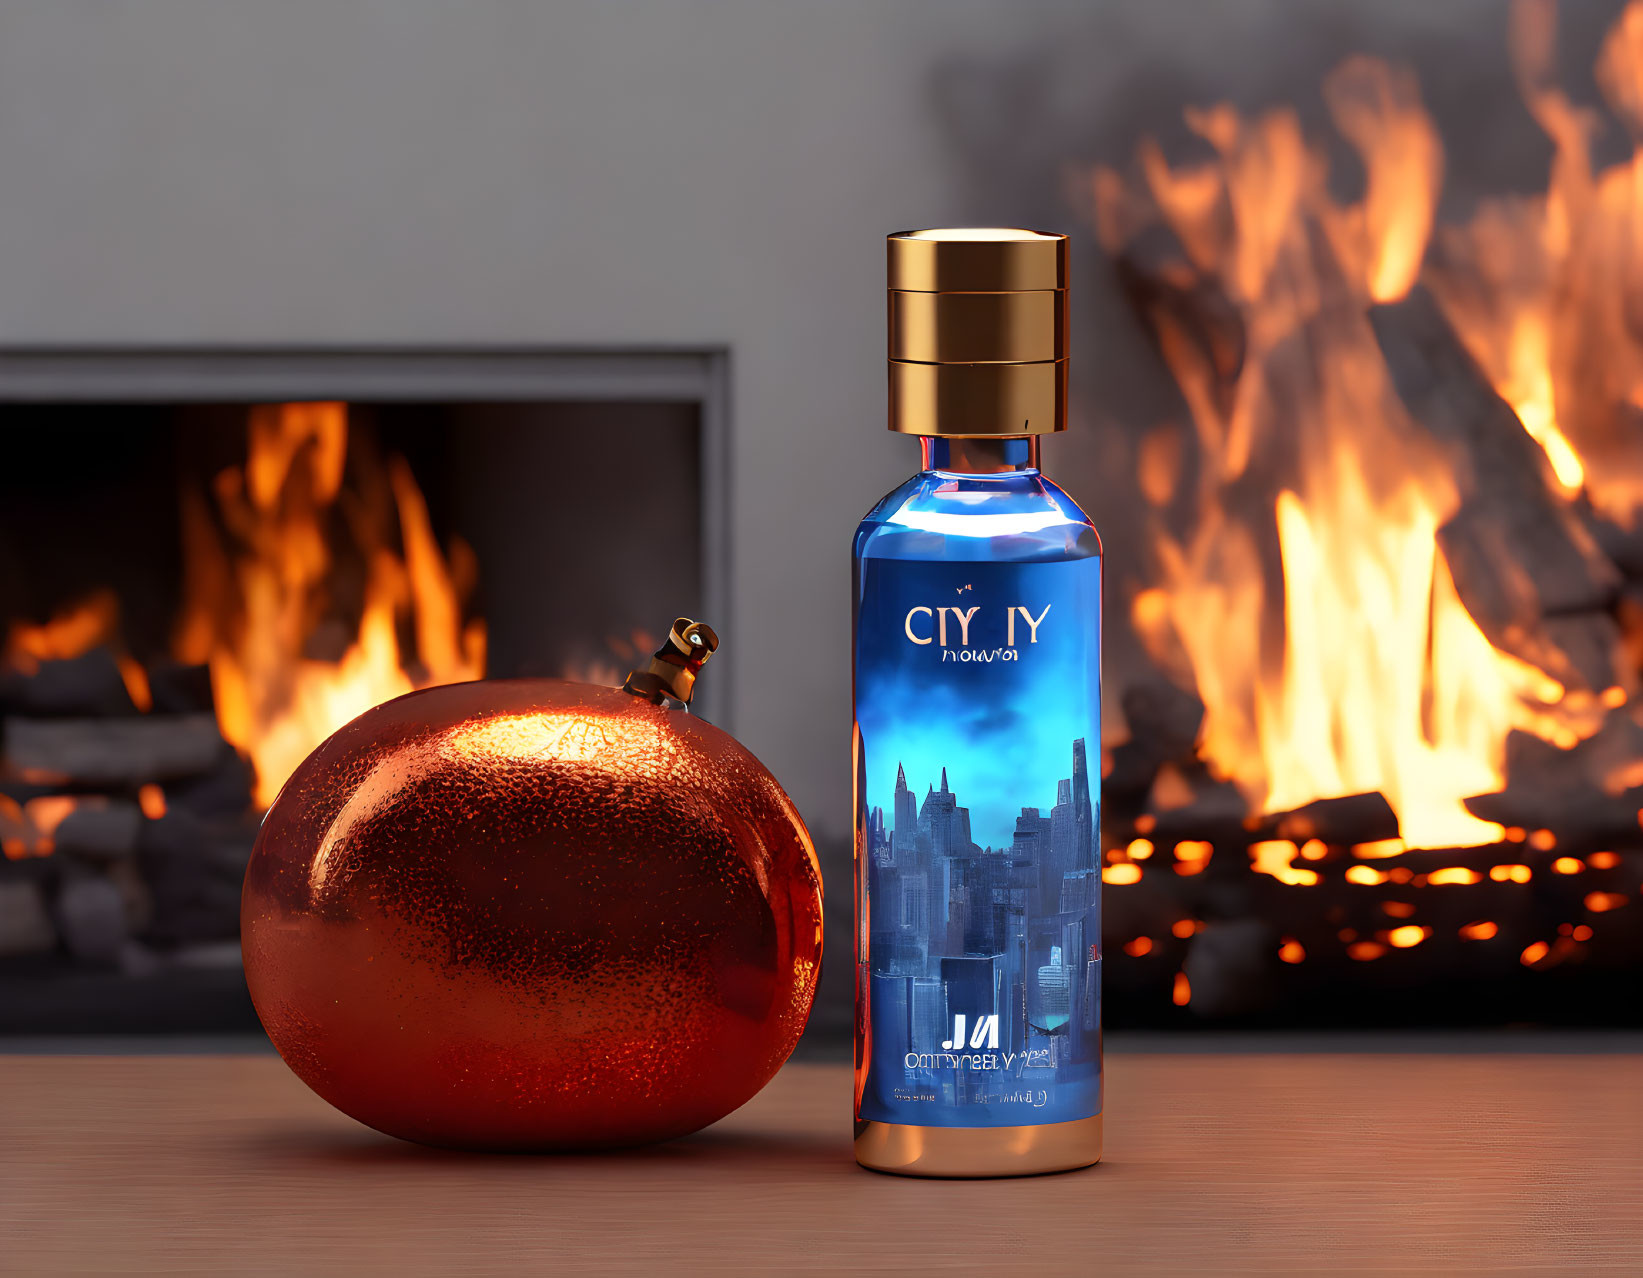 Red spherical object and blue perfume bottle with "CITY" against cozy fireplace.